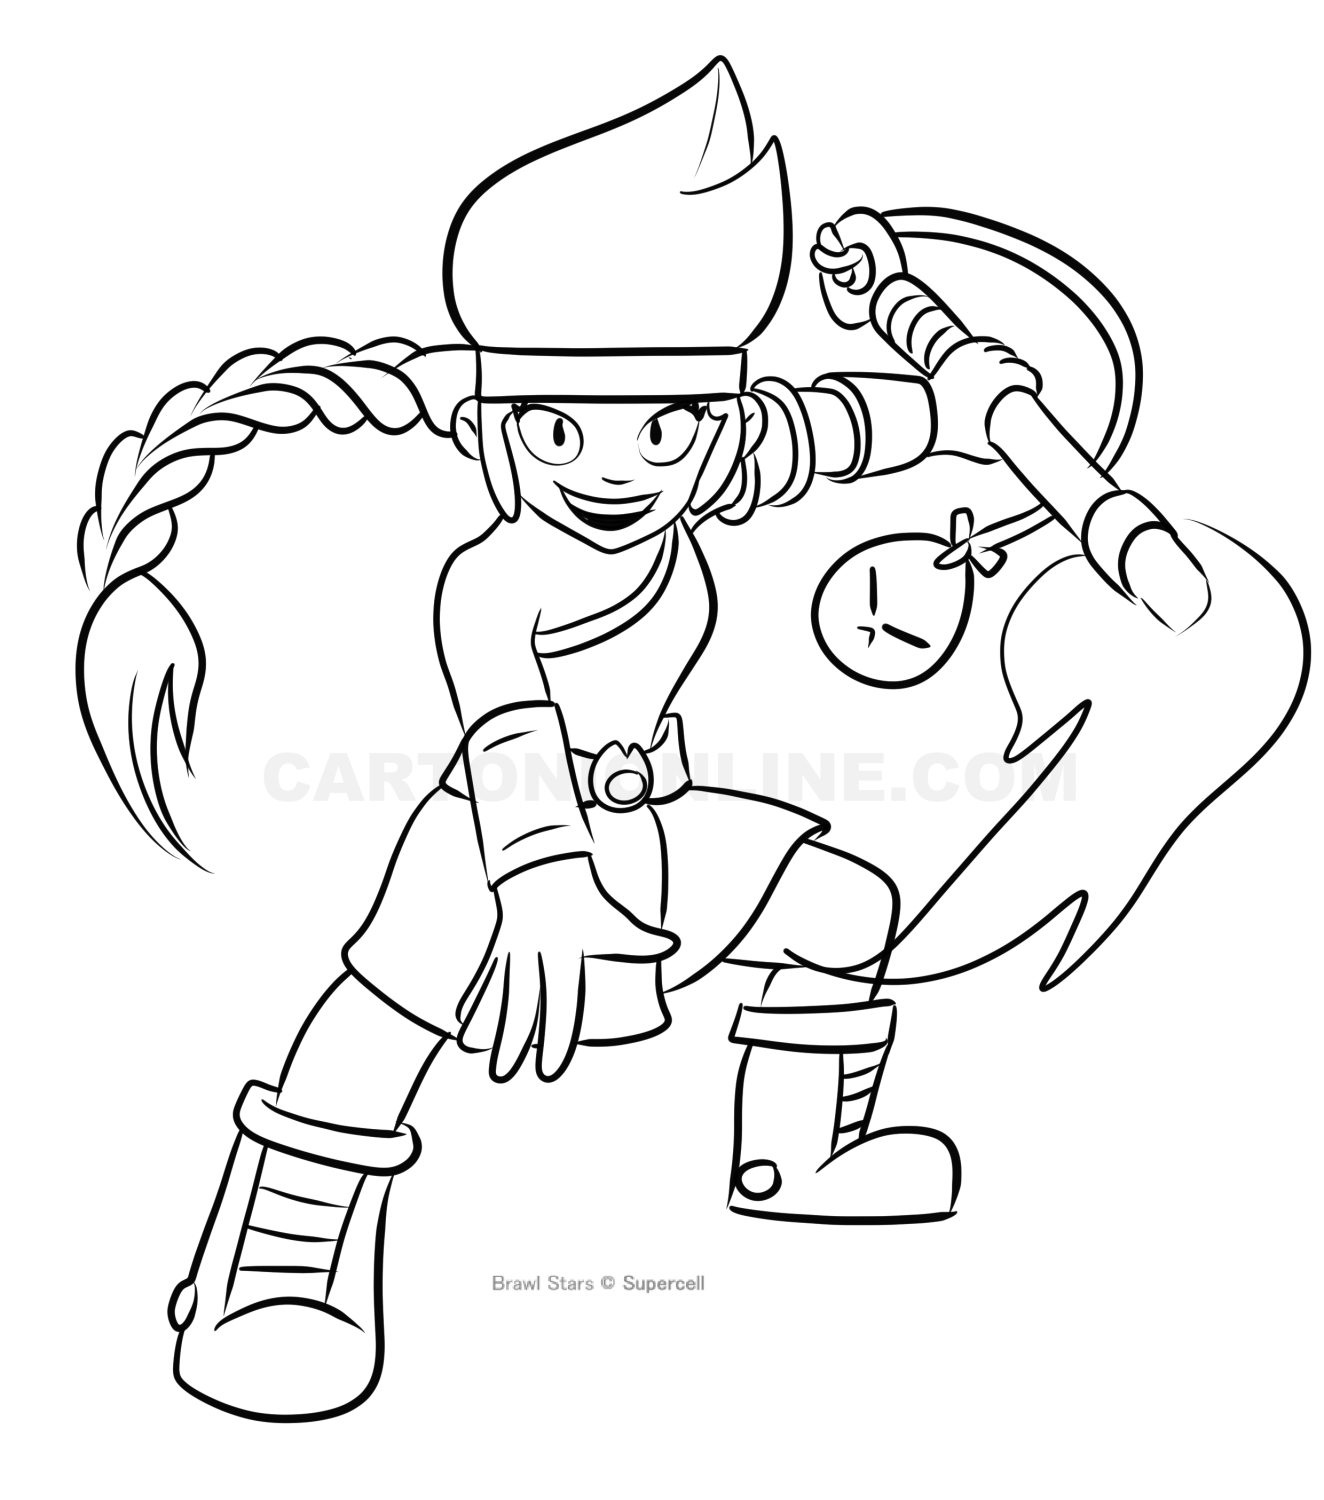 Amber 03 from Brawl Stars coloring pages to print and coloring